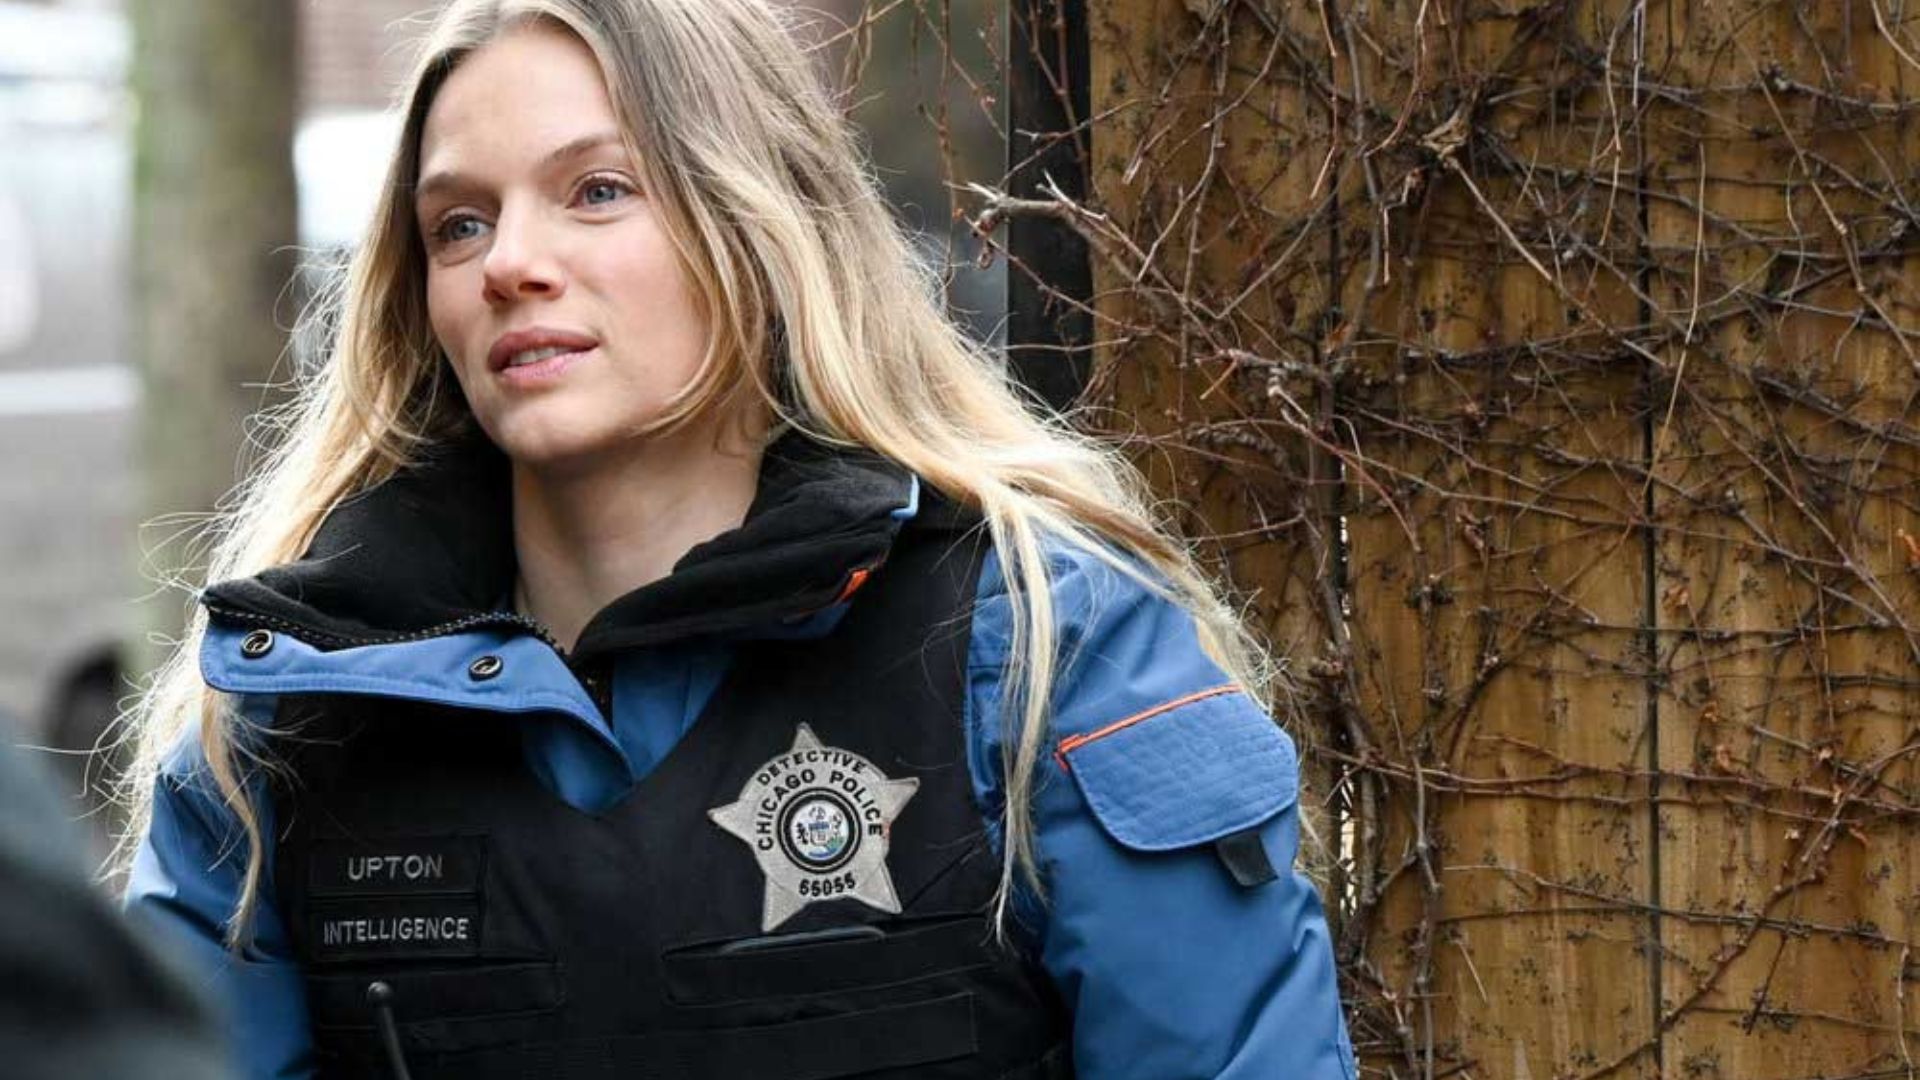 Chicago P.D. Season 11: When can we expect it to premiere?